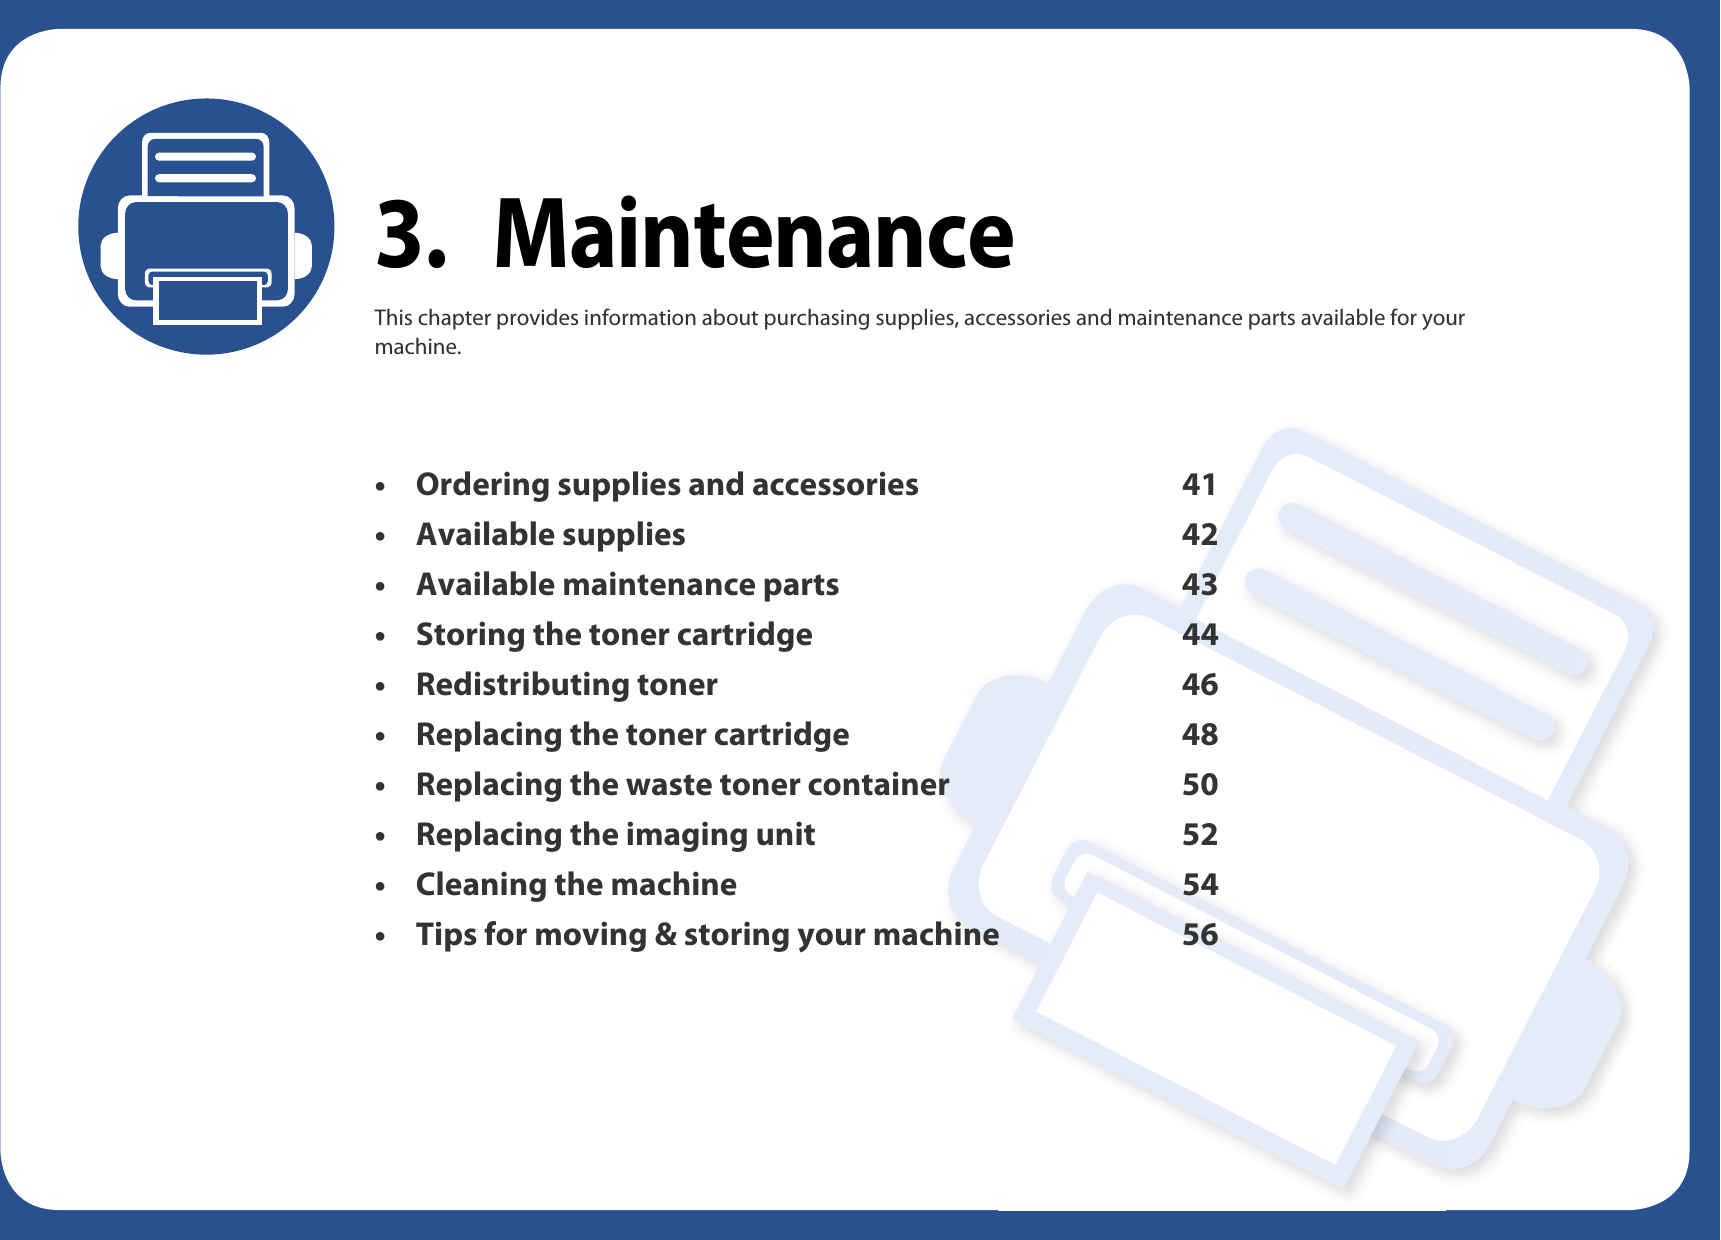 3. MaintenanceThis chapter provides information about purchasing supplies, accessories and maintenance parts available for your machine.• Ordering supplies and accessories 41• Available supplies 42• Available maintenance parts 43• Storing the toner cartridge 44• Redistributing toner 46• Replacing the toner cartridge 48• Replacing the waste toner container 50• Replacing the imaging unit 52• Cleaning the machine 54• Tips for moving &amp; storing your machine 56